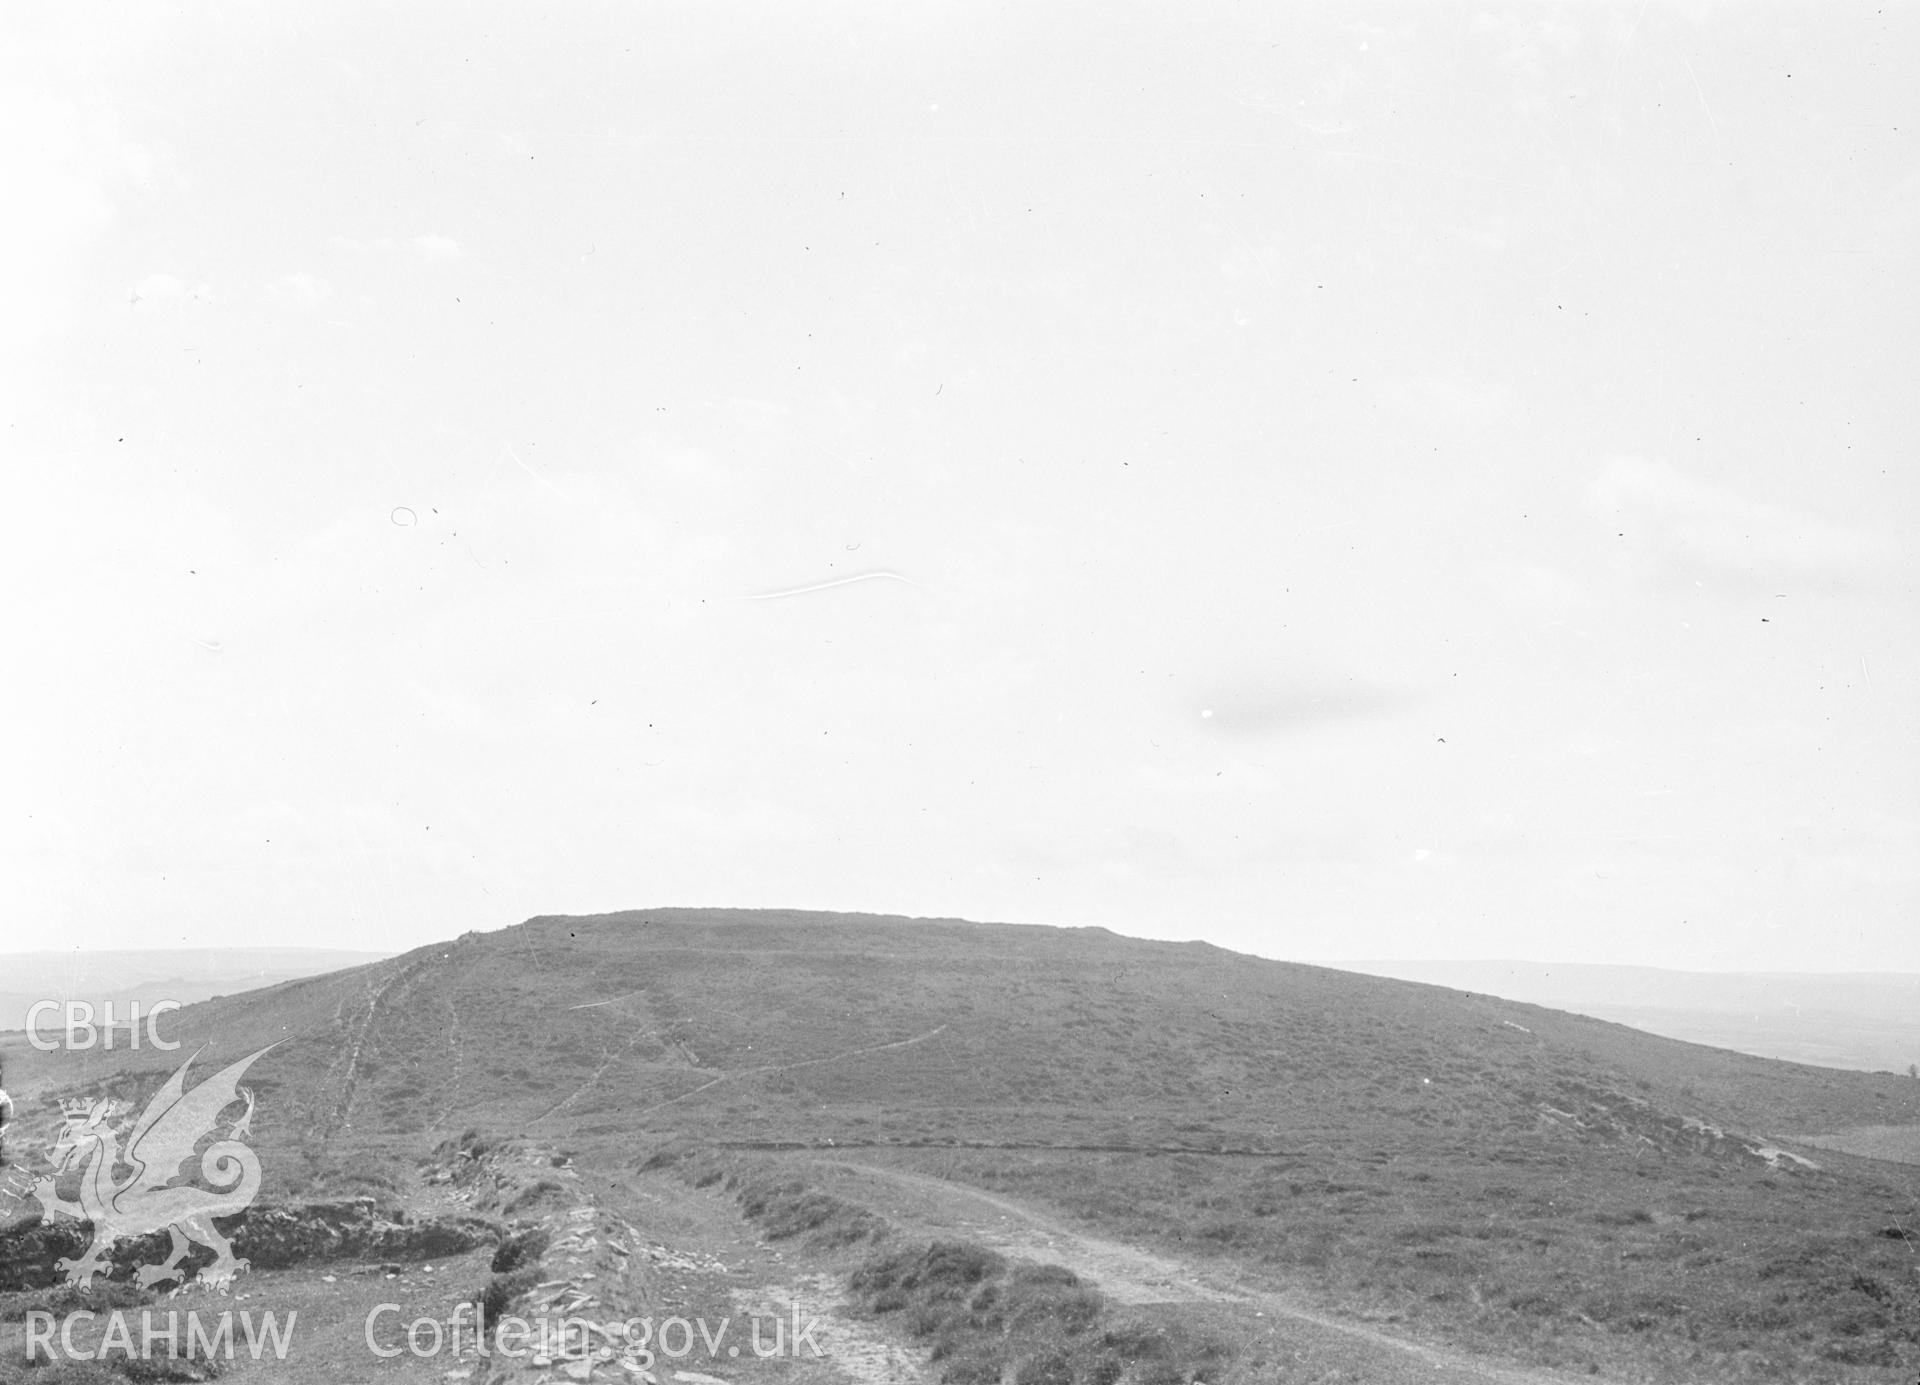 Digital copy of a nitrate negative showing Bwlch Castell Hill Fort. Reverse of black and white photograph reads: 'Cardigan / Cilcennin / Bwlch Castell Hill Fort.' From the Cadw Monuments in Care Collection.